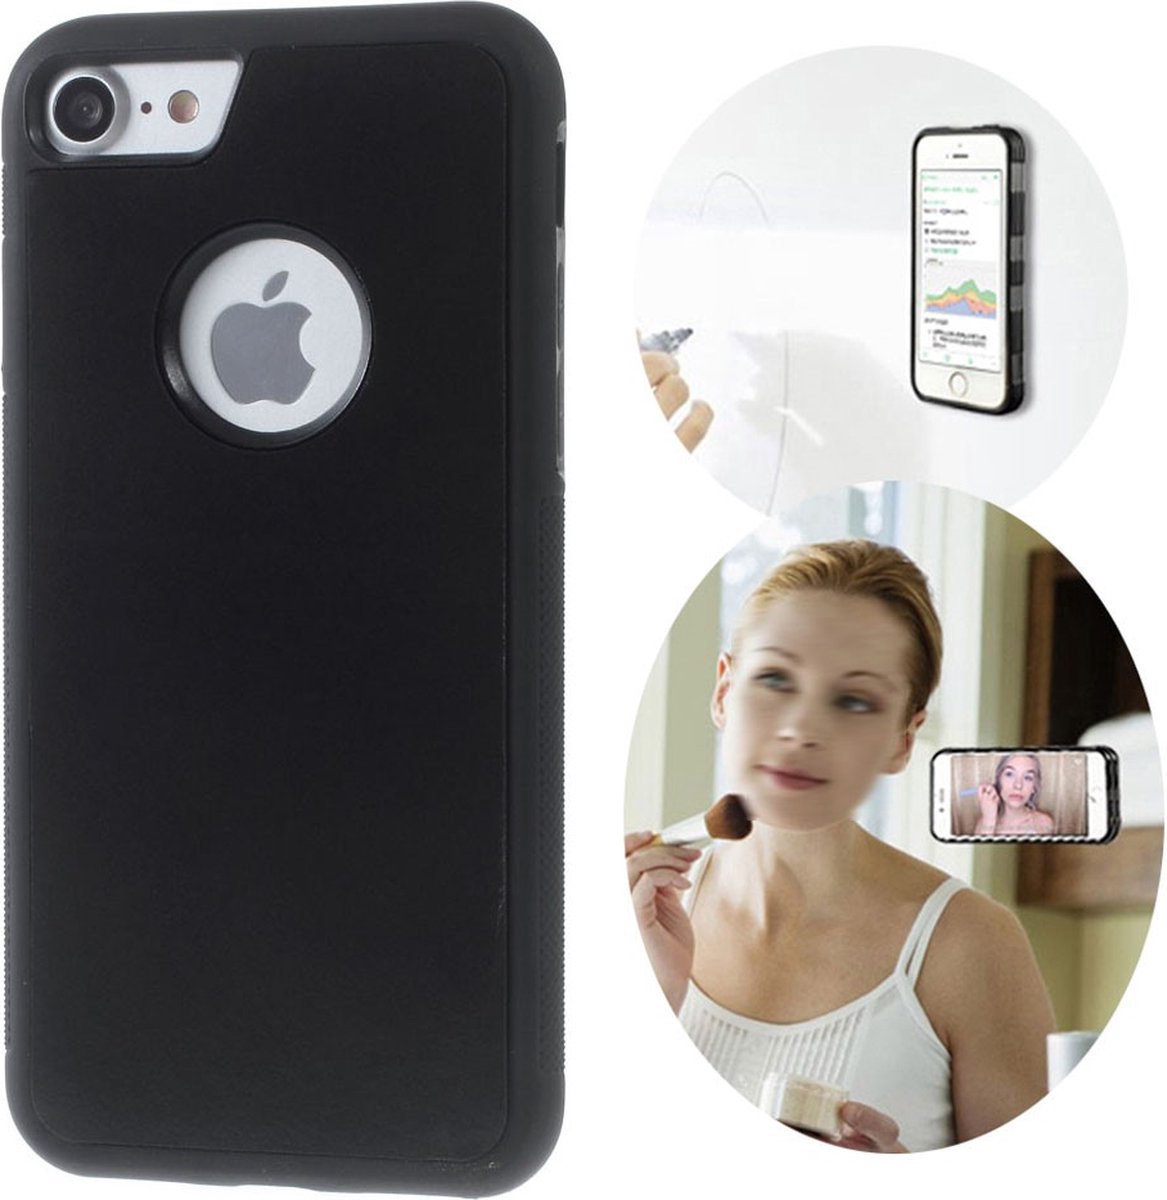 Peachy Anti-Gravity case hands-free selfie cover zwart iPhone 7 8 hoes nano coating